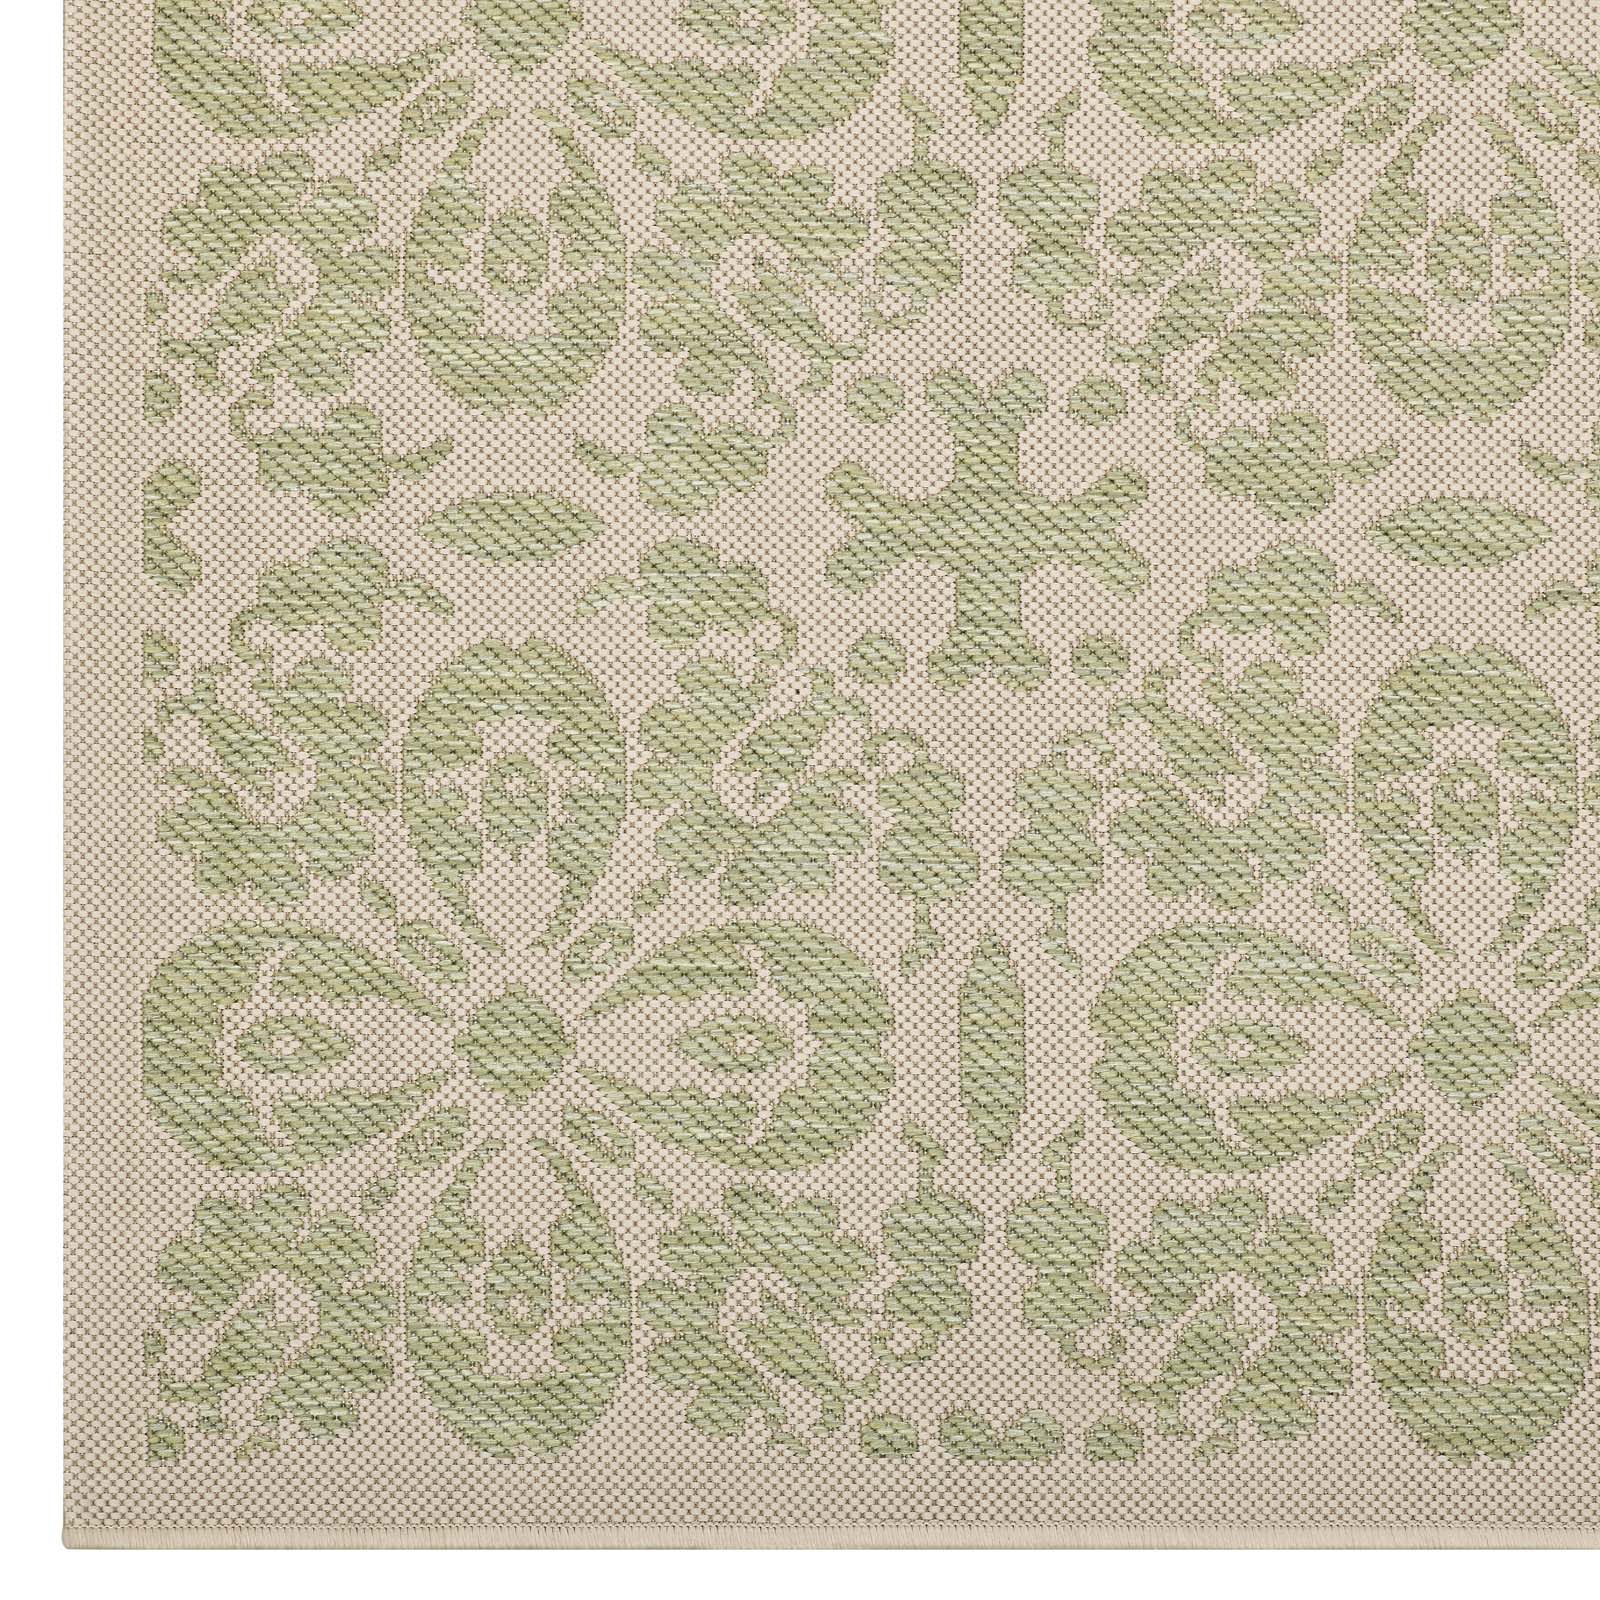 Modway Outdoor Rugs - Ariana Floral Trellis 5'x8' Outdoor Area Rug Light Green & Beige